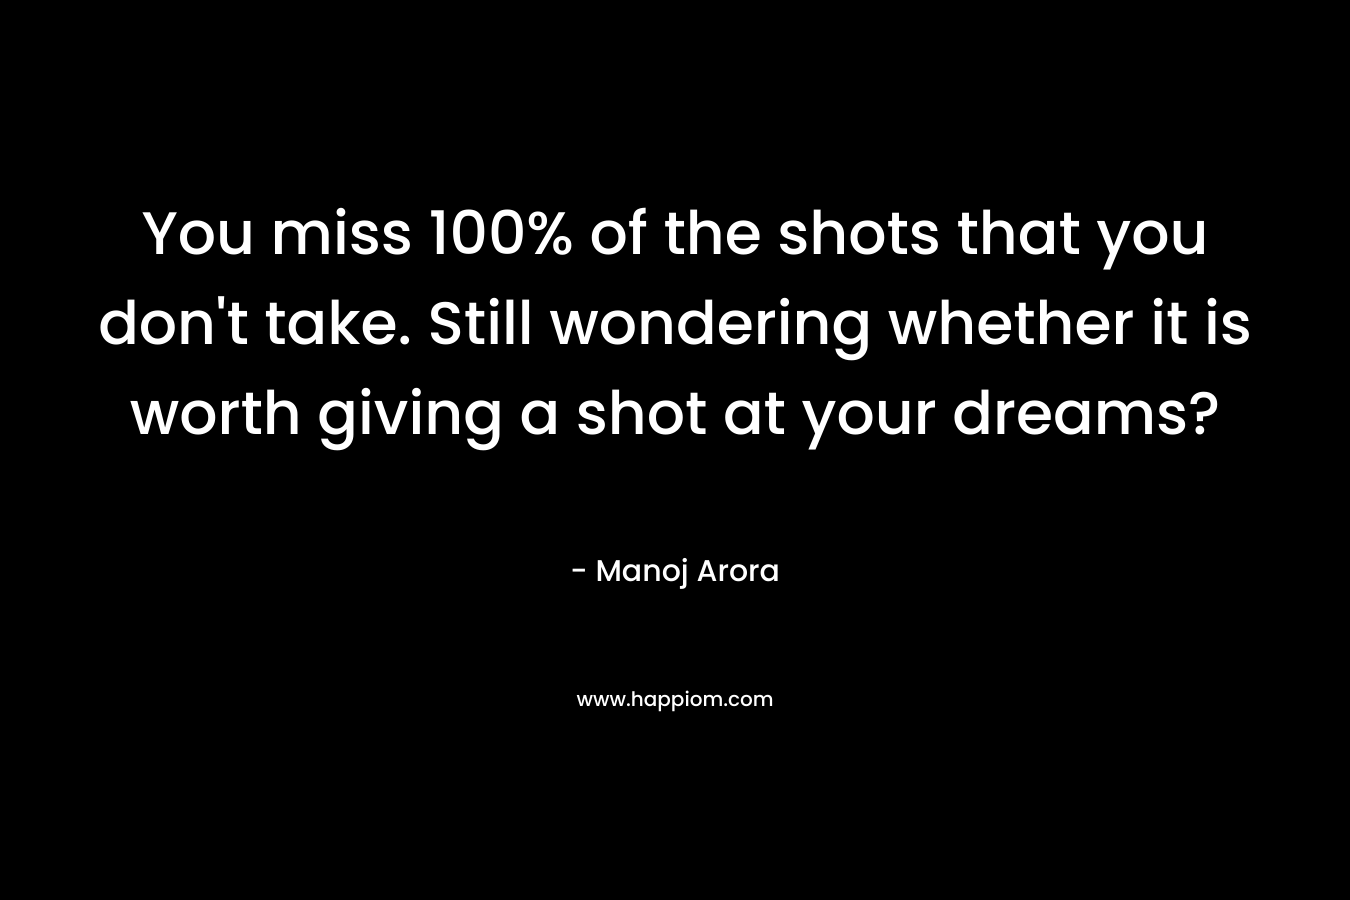 You miss 100% of the shots that you don't take. Still wondering whether it is worth giving a shot at your dreams?